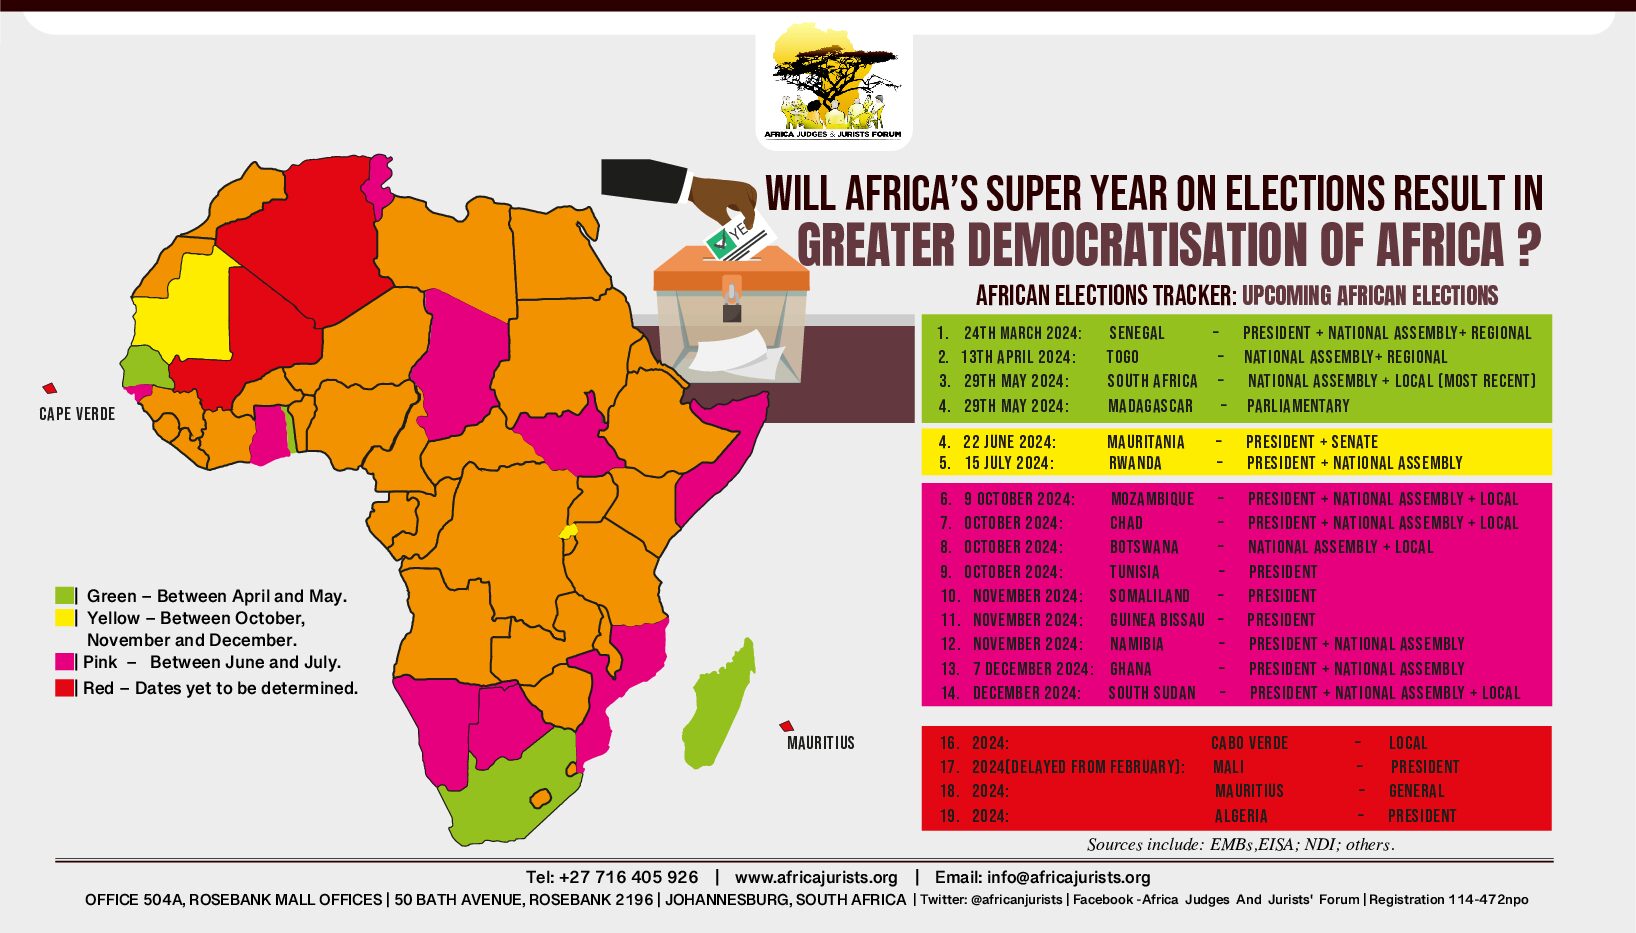 Will Africa’s Super Year on Elections Result in Greater Democratisation of Africa?